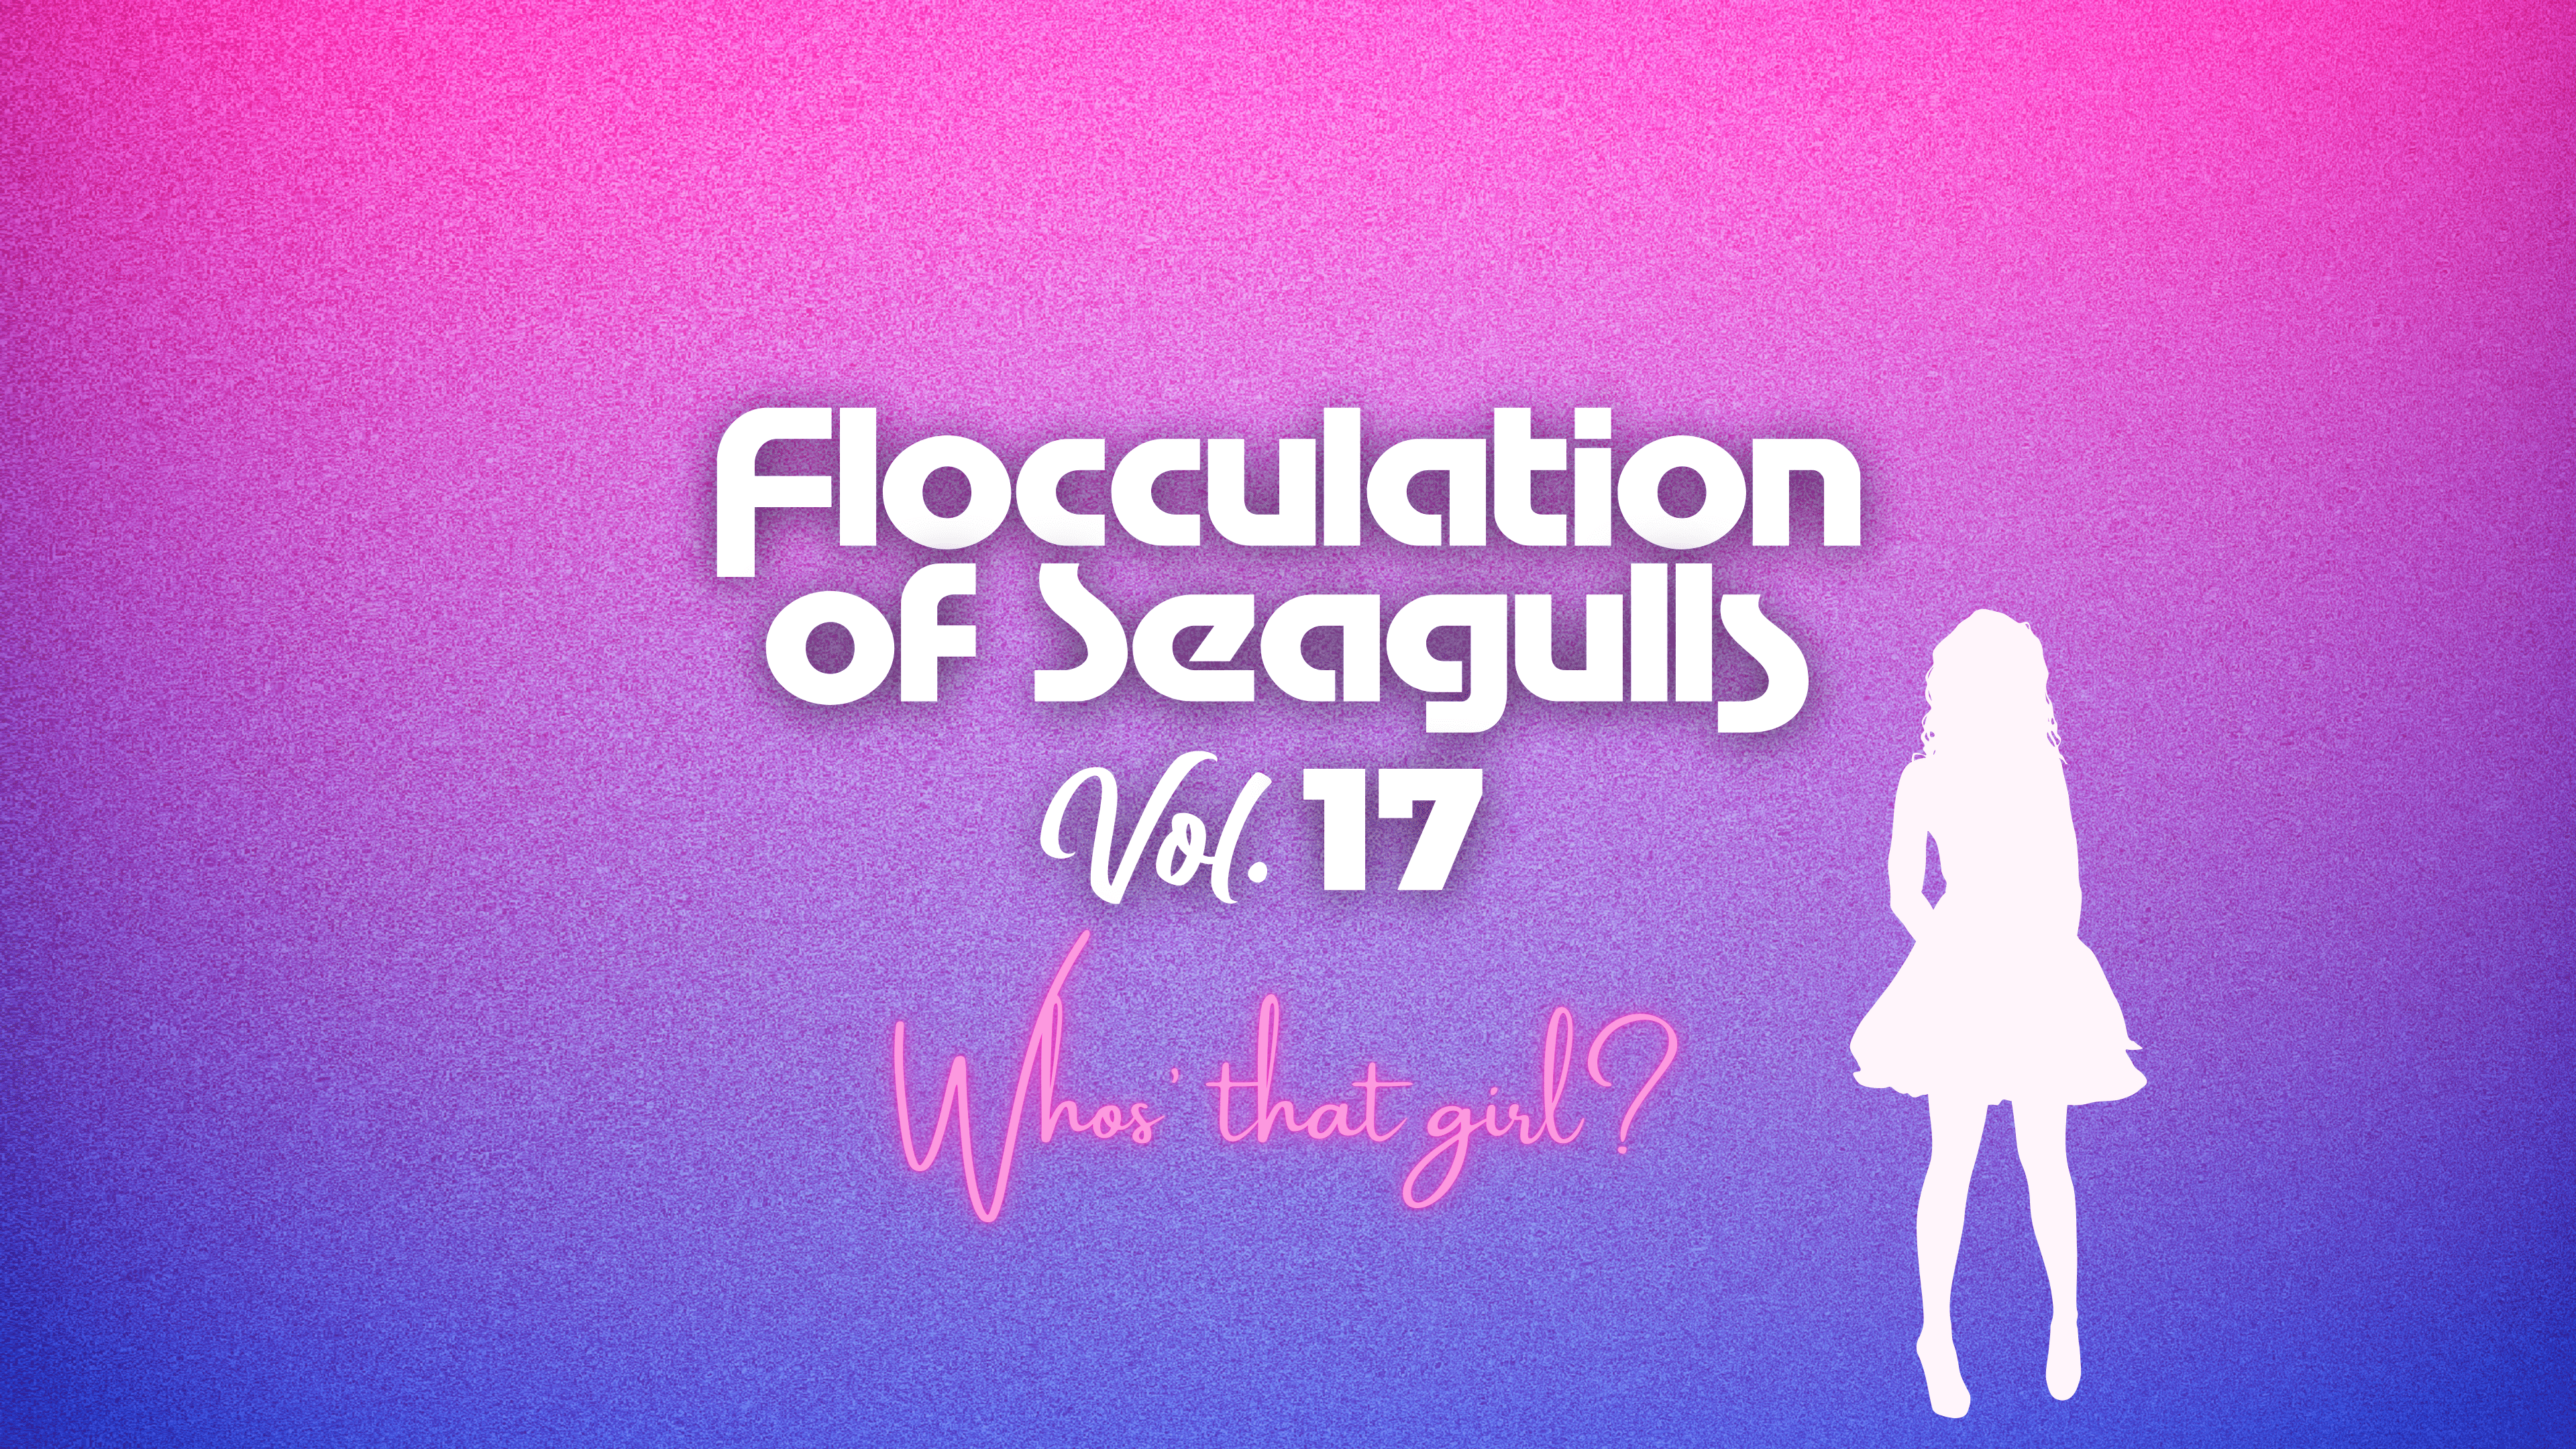 On Rotation Flocculation of Seagulls Volume 17 Hazy IPA Release